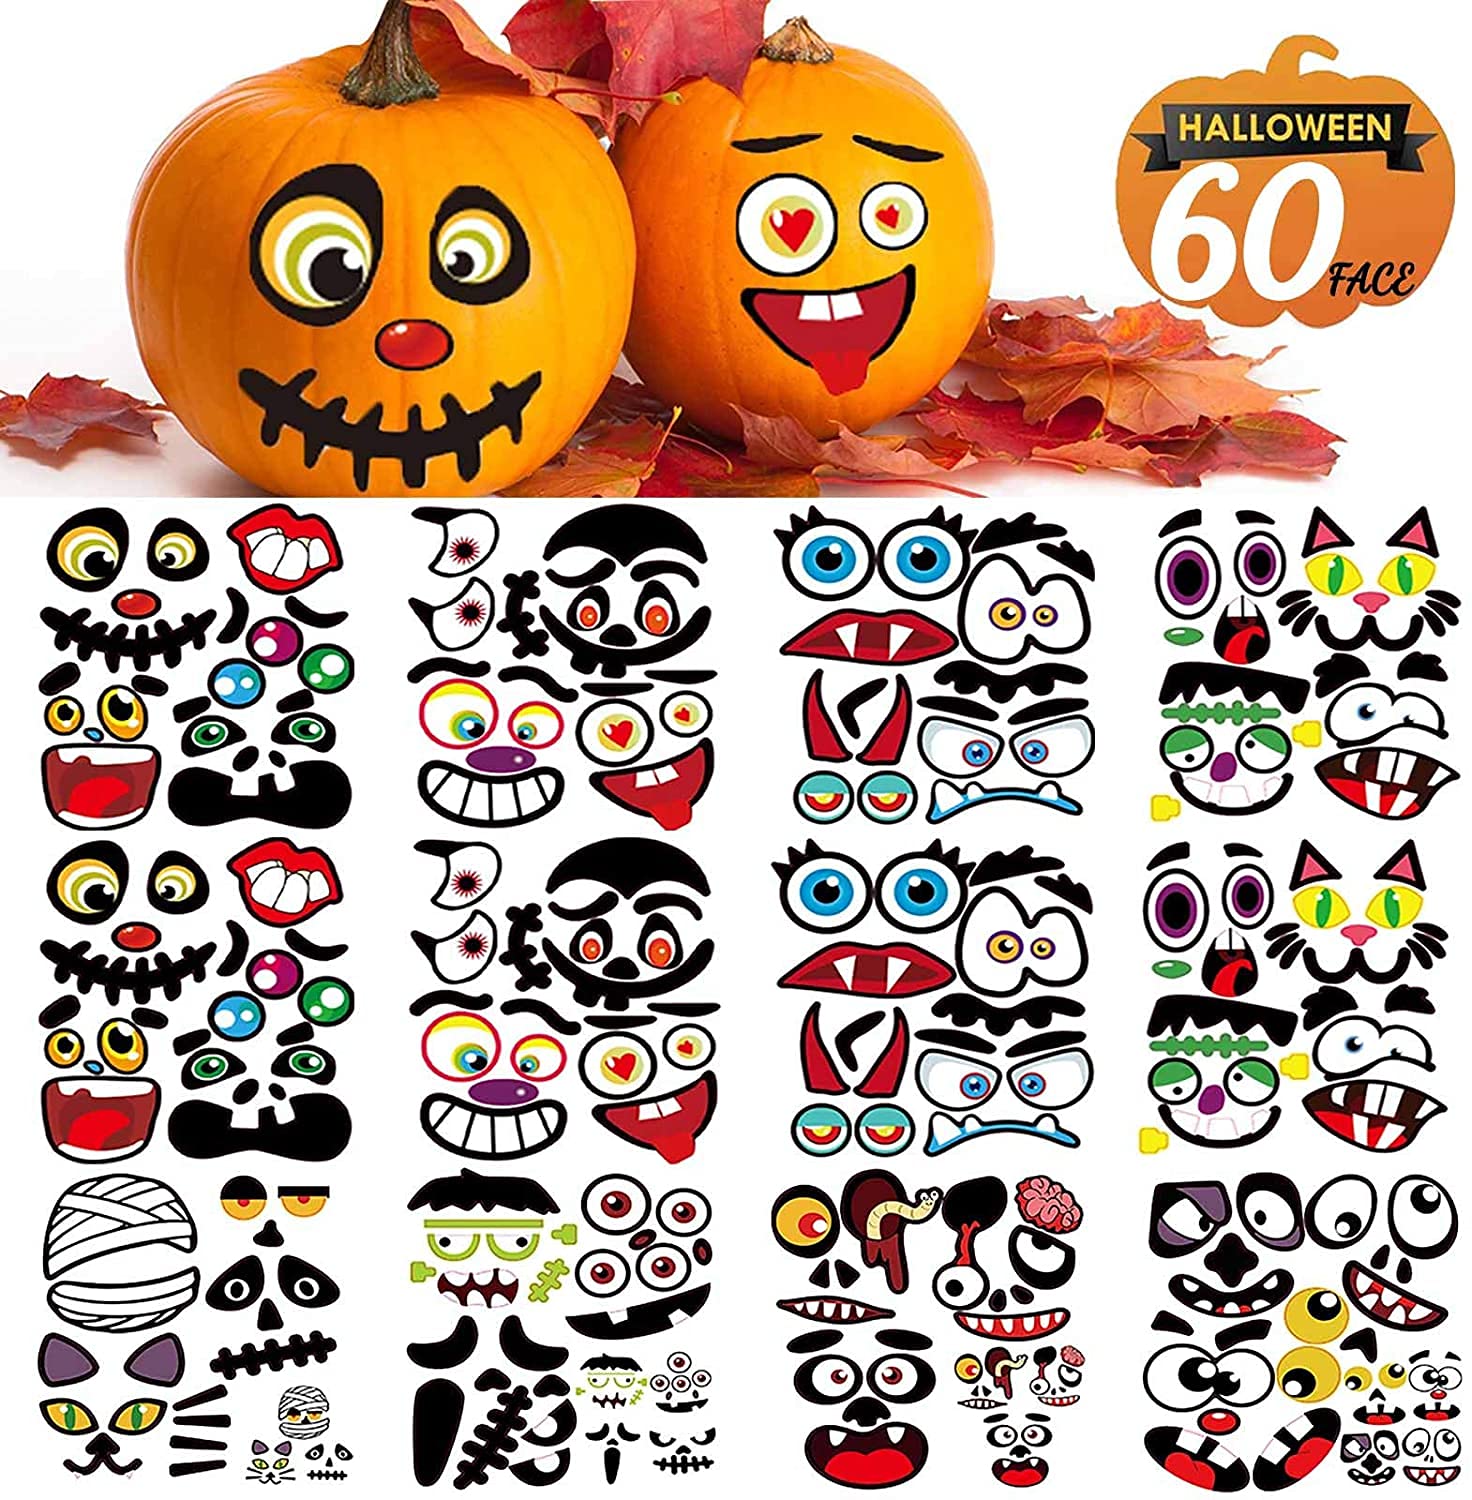 Halloween Pumpkin Decorating Stickers, Jack-O-Lantern Face Decals Kit for Pumpkins and Squashes, 60 Cute Expressions Crafts Stickers Halloween Treat Party Supplies Idea Gifts for Kids